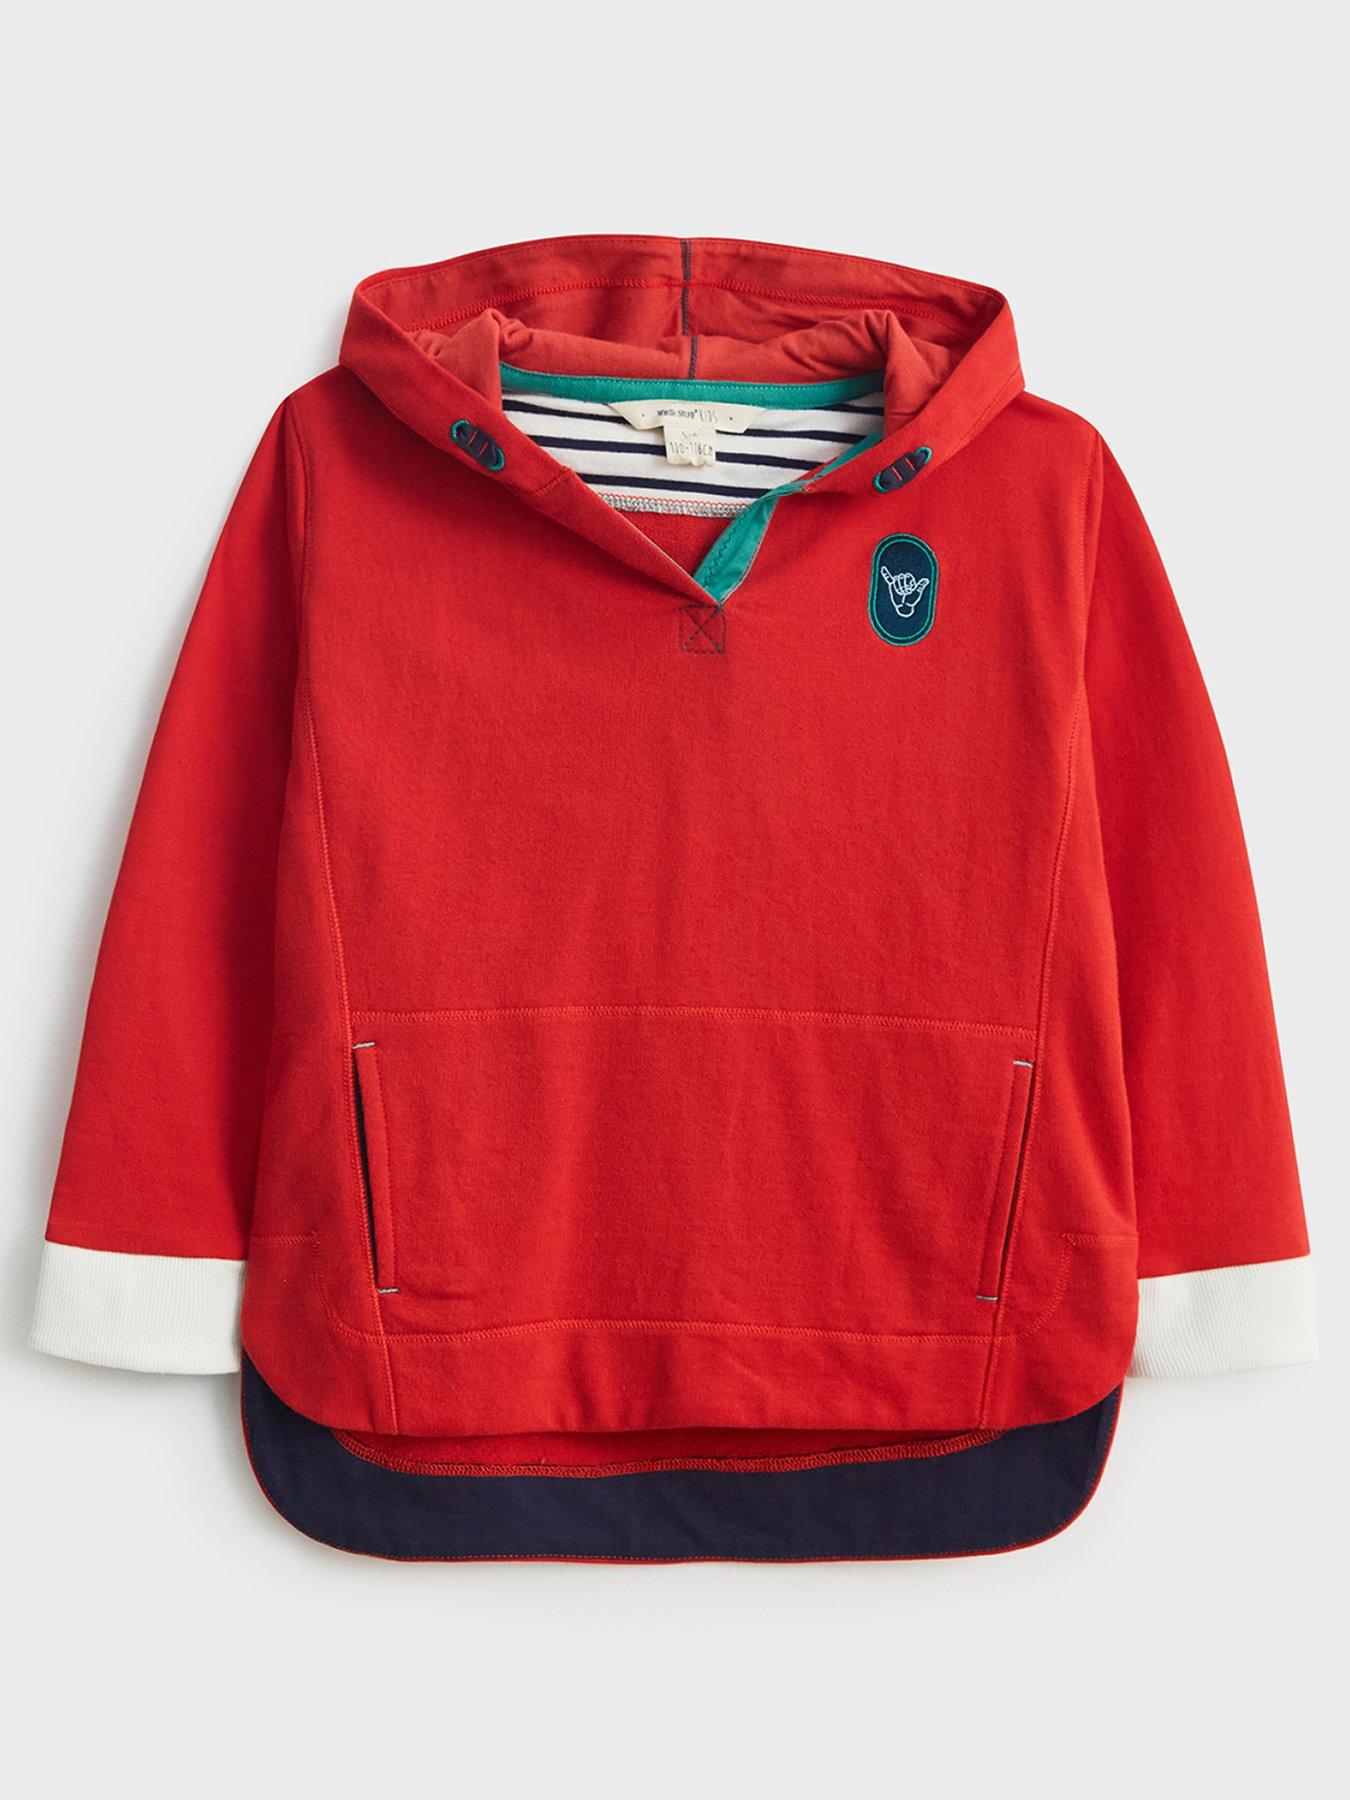 Boys Clothes Boys Skater Hoodie - Red